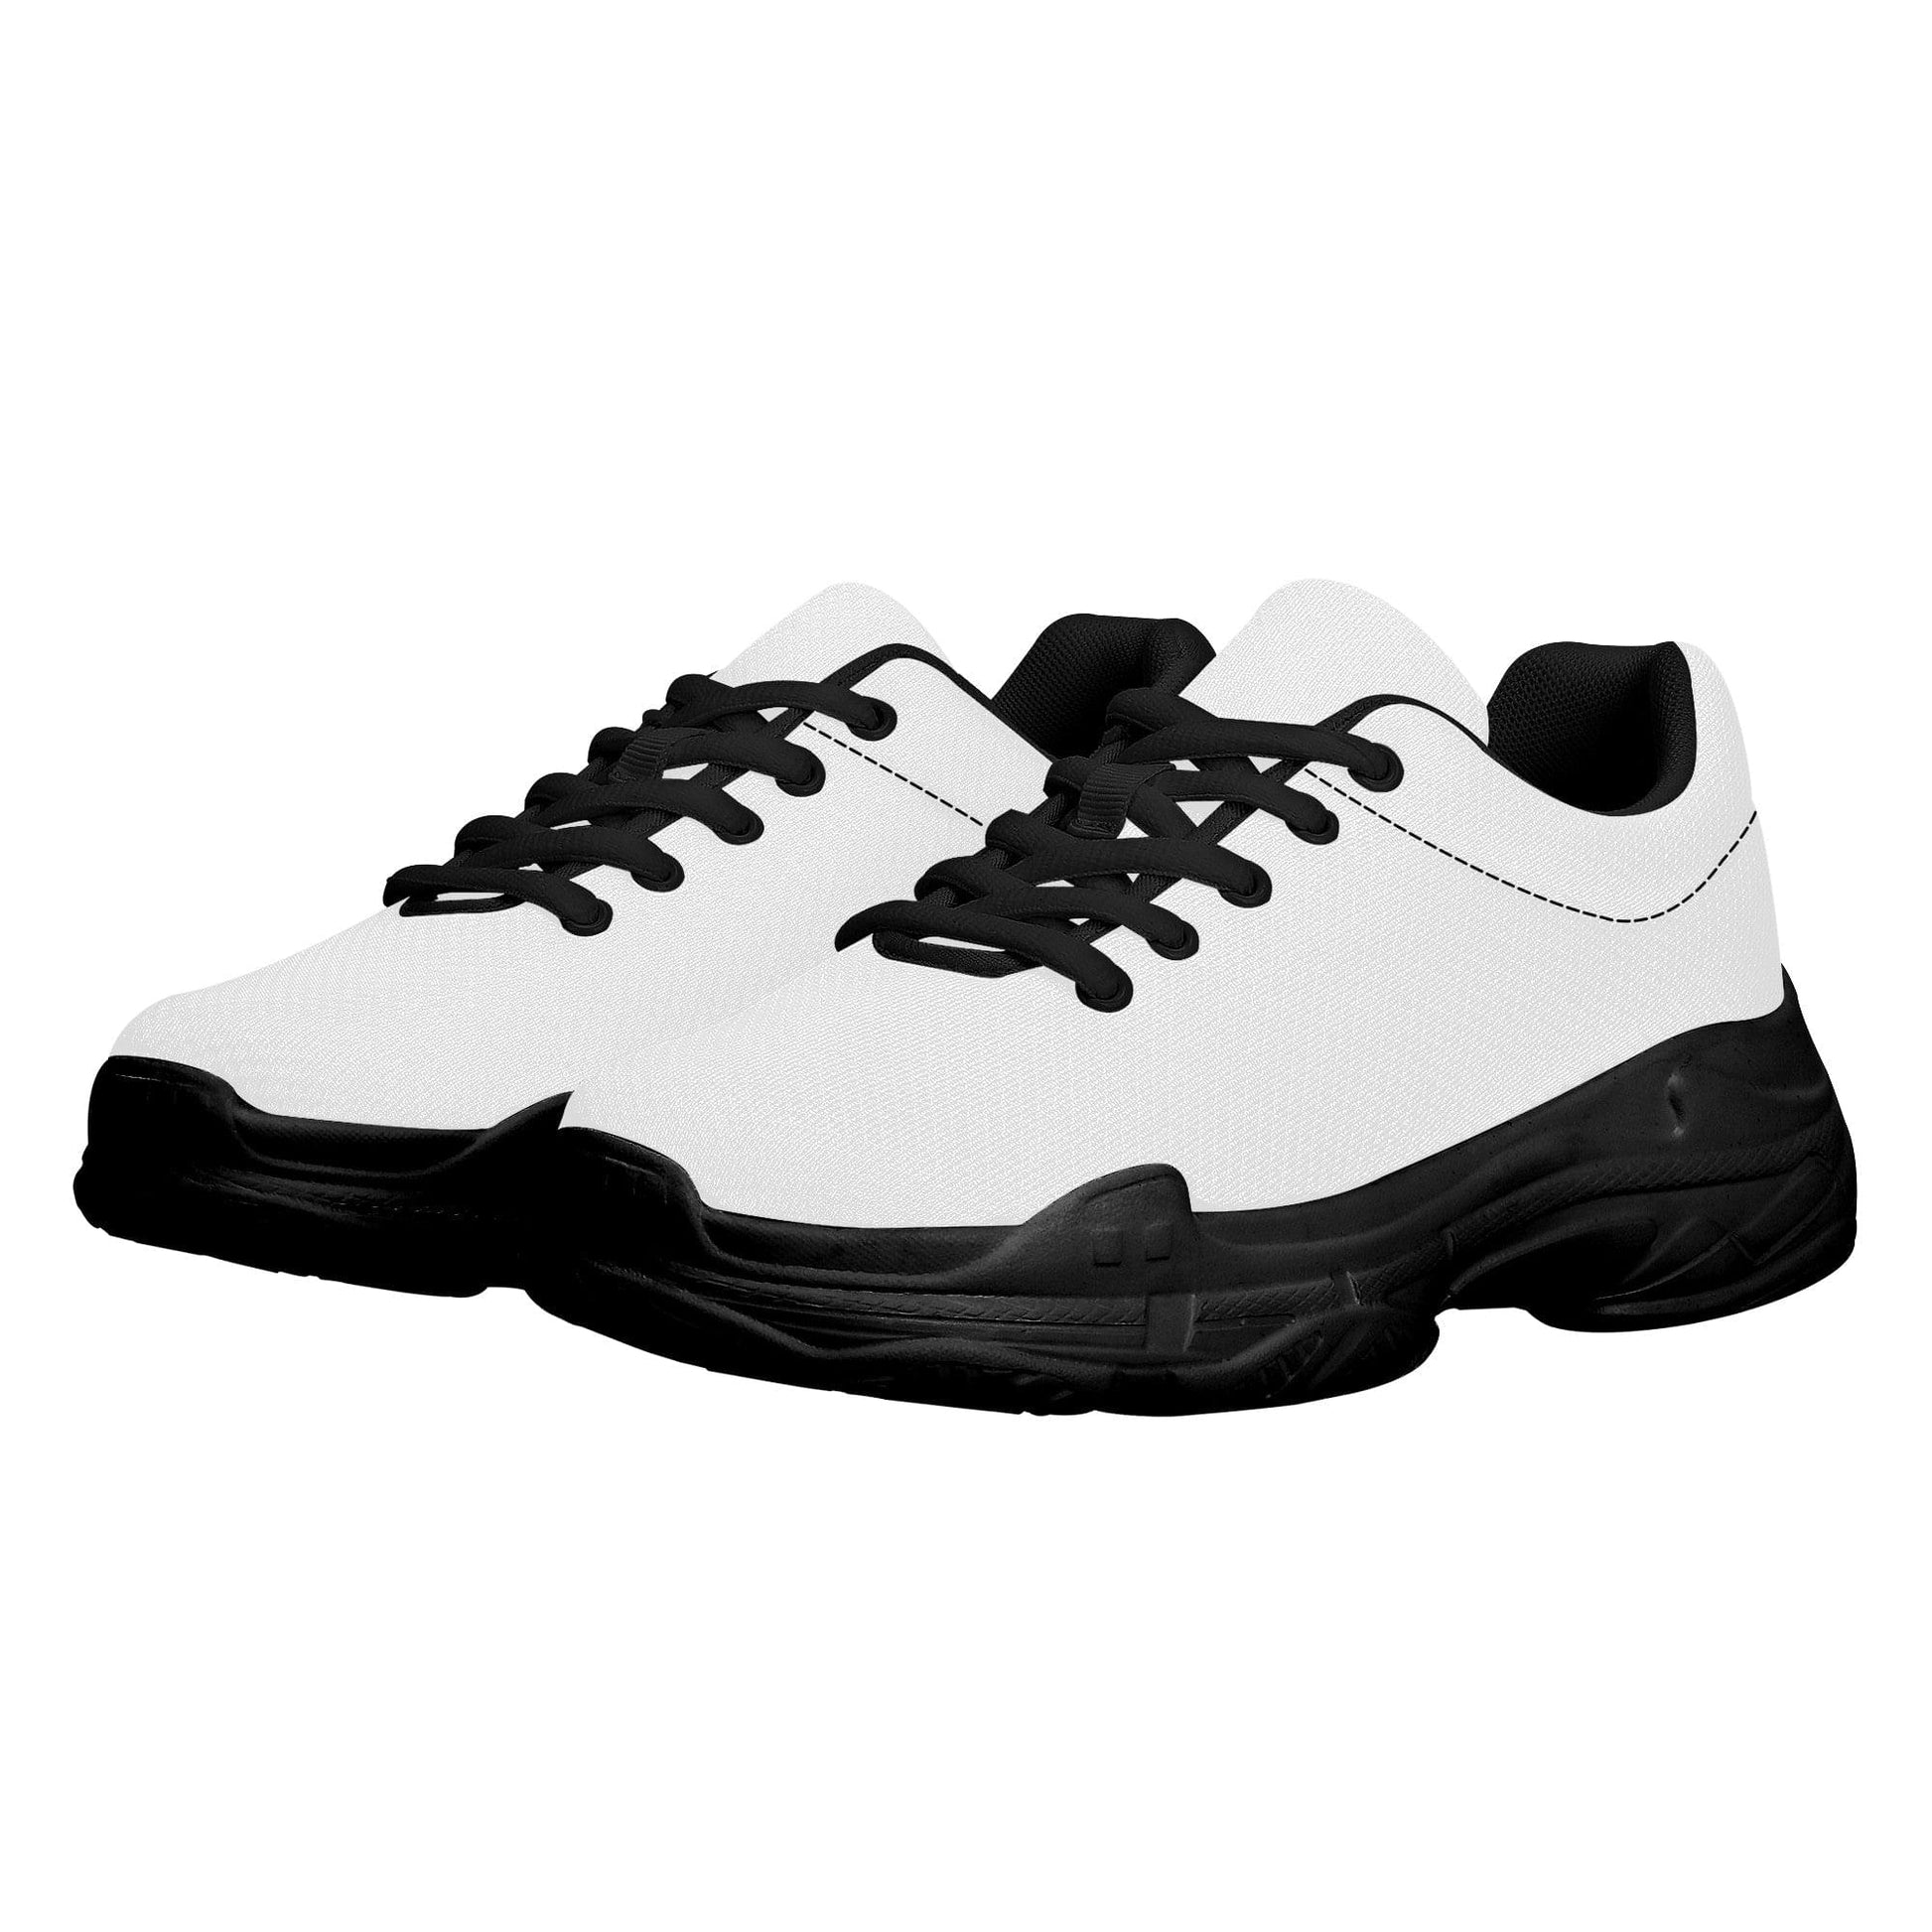 Custom Running Shoes-Black D22 Chunky Style Colloid Colors 